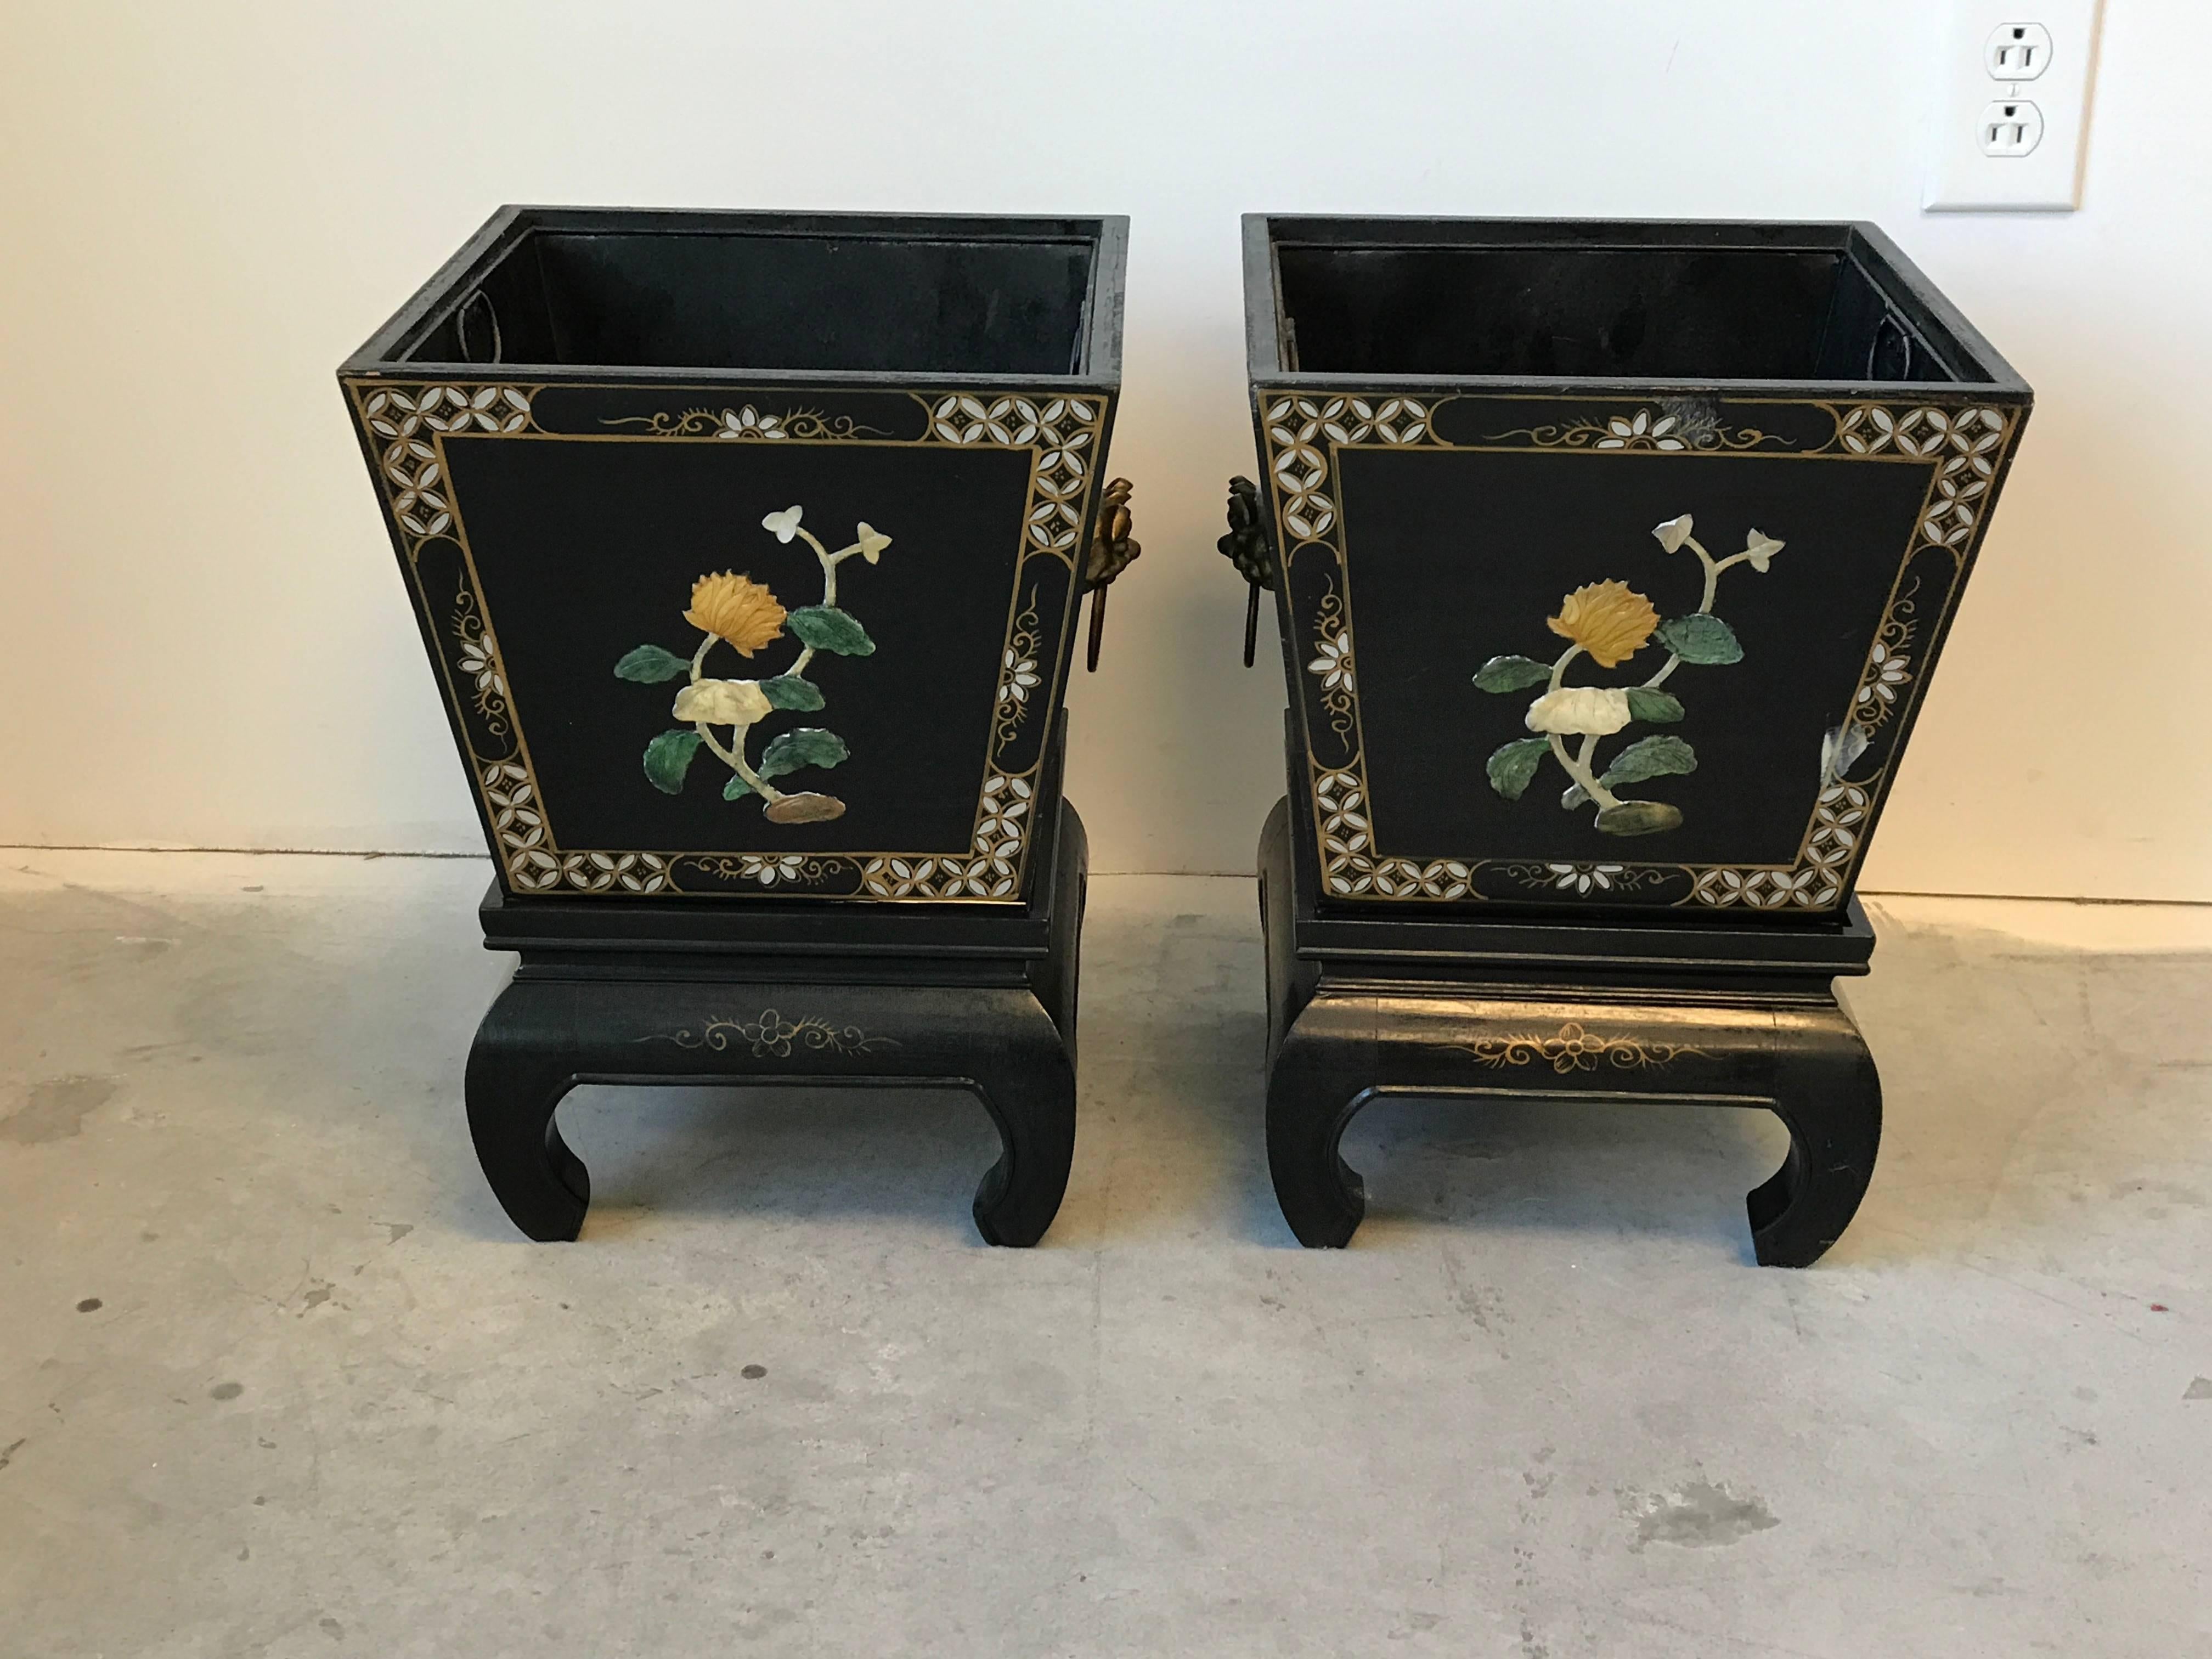 20th Century 1960s Black and Gold Asian Planters on Stands with Brass Foo Dog Handles, Pair